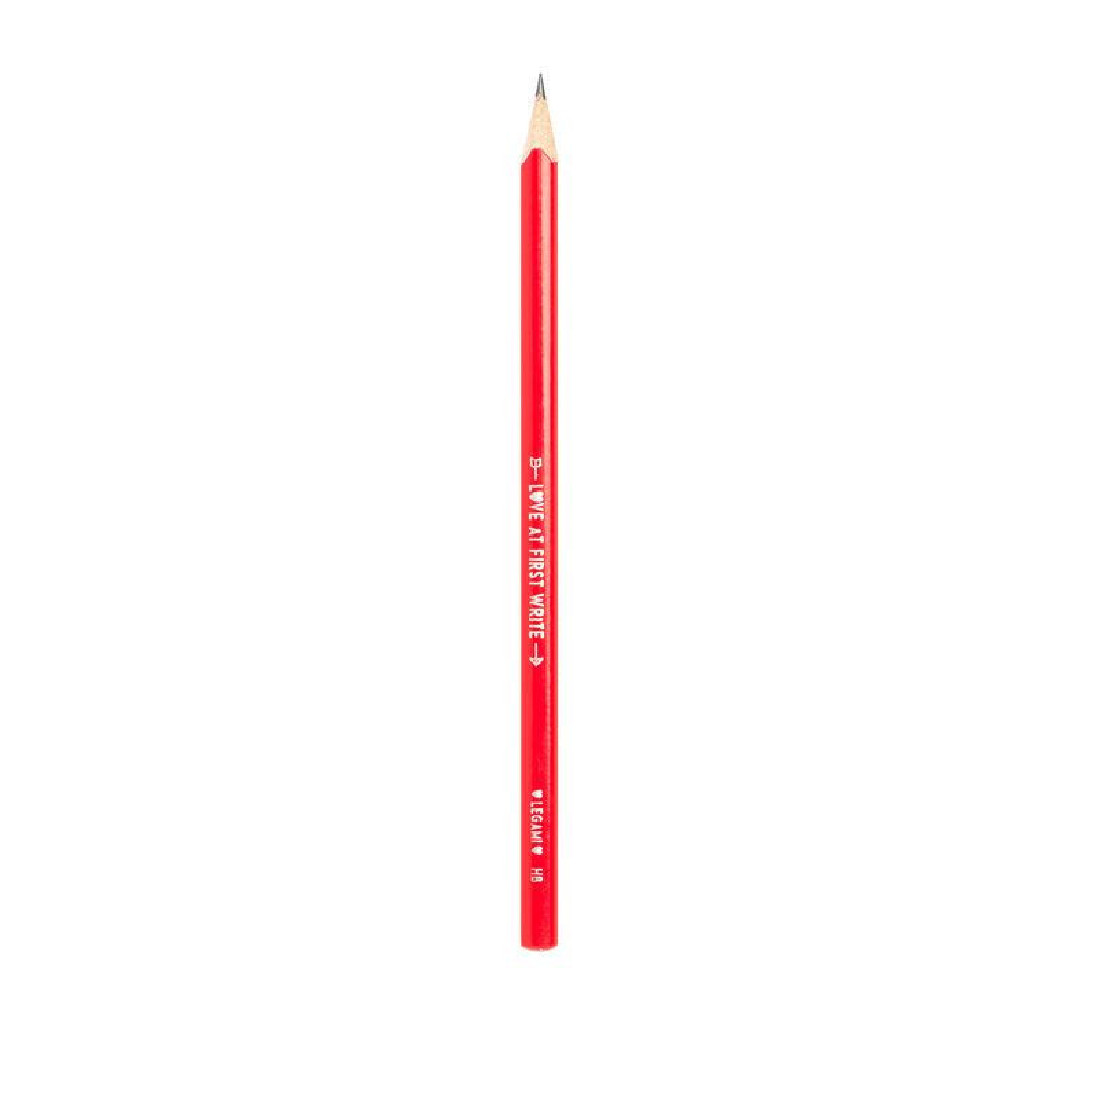 Heart-Shaped Pencil - Love at First Write LEGAMI